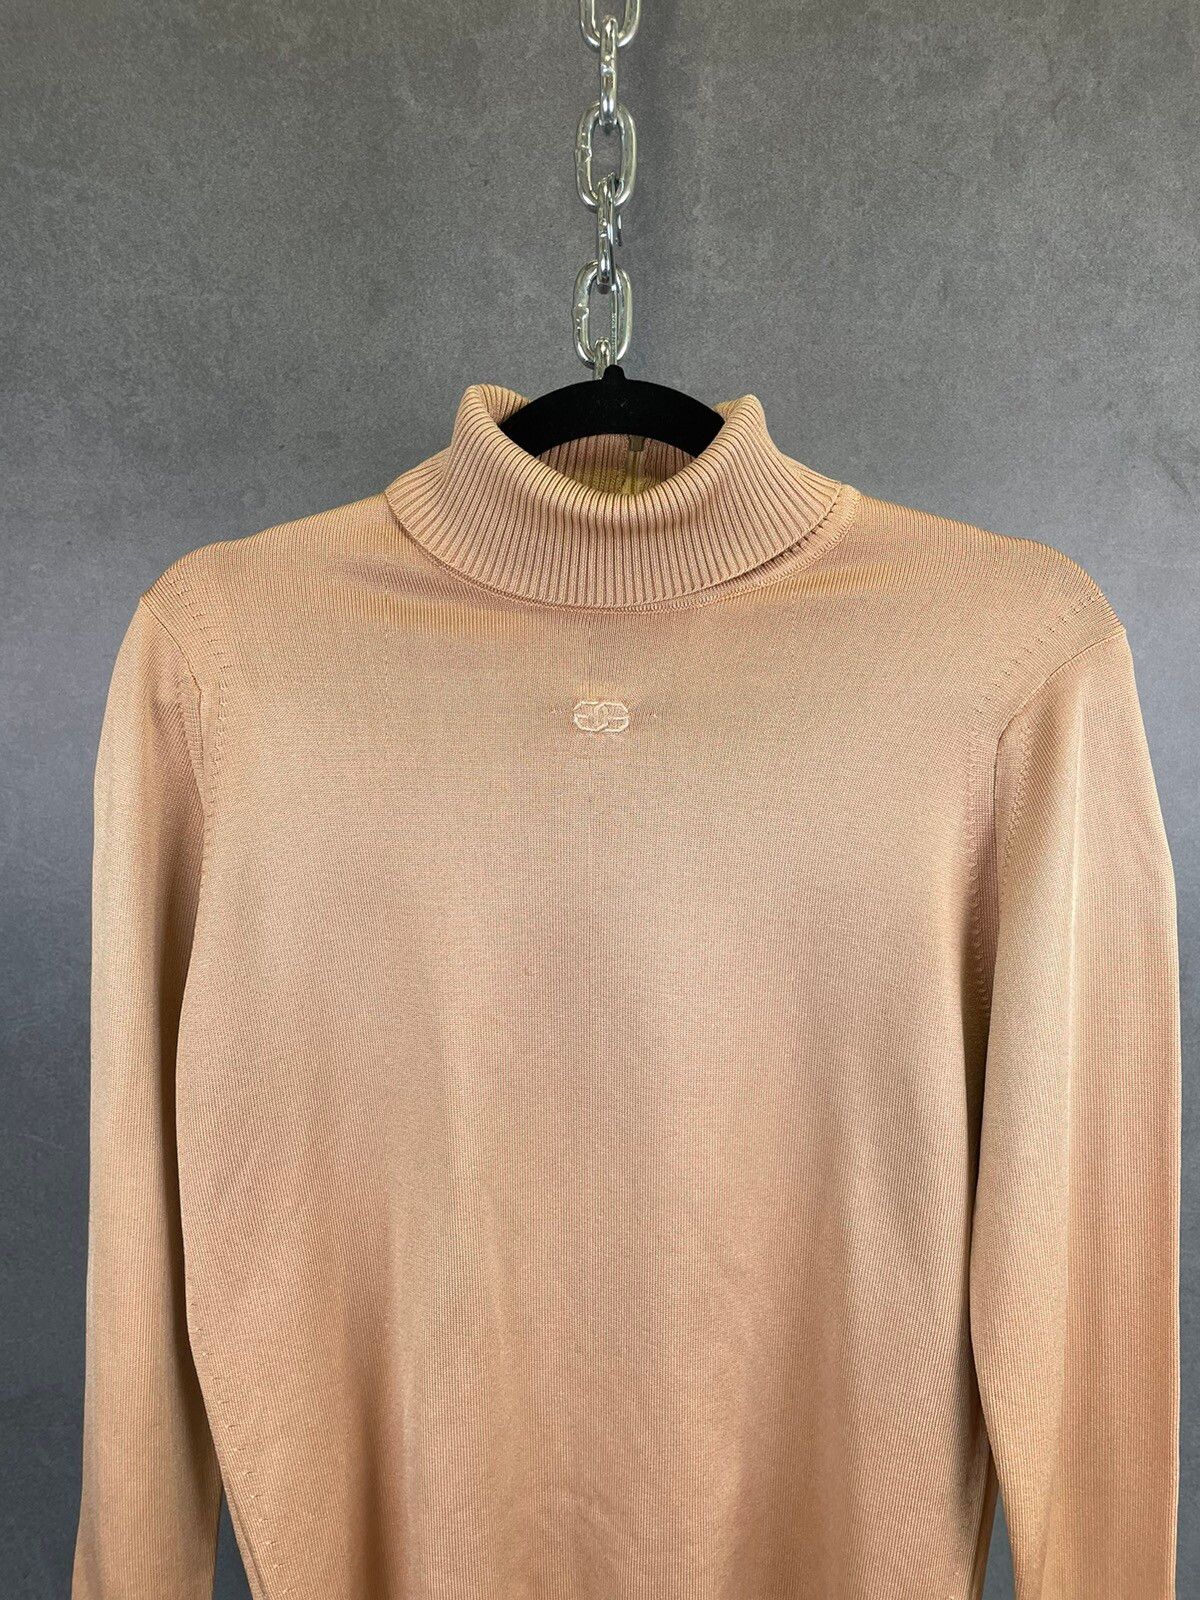 Givenchy Vintage 70s Givenchy Sport Tan Turtleneck Top Size 38 Size S / US 4 / IT 40 - 2 Preview